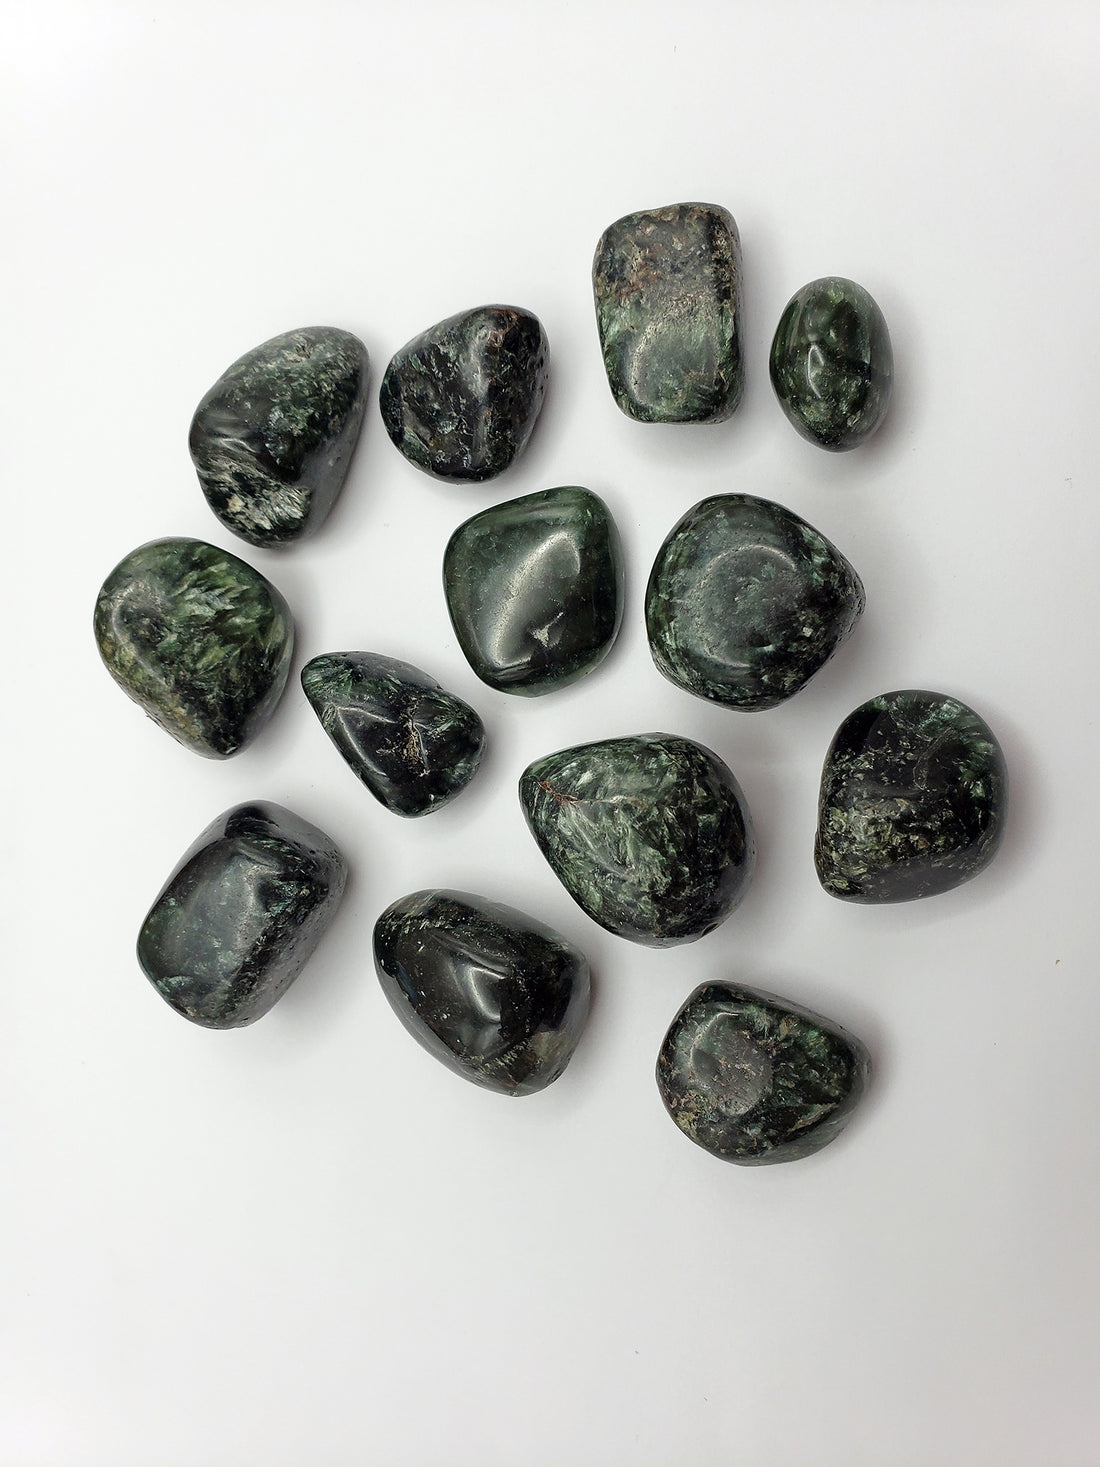 seraphinite tumbled pieces on white background